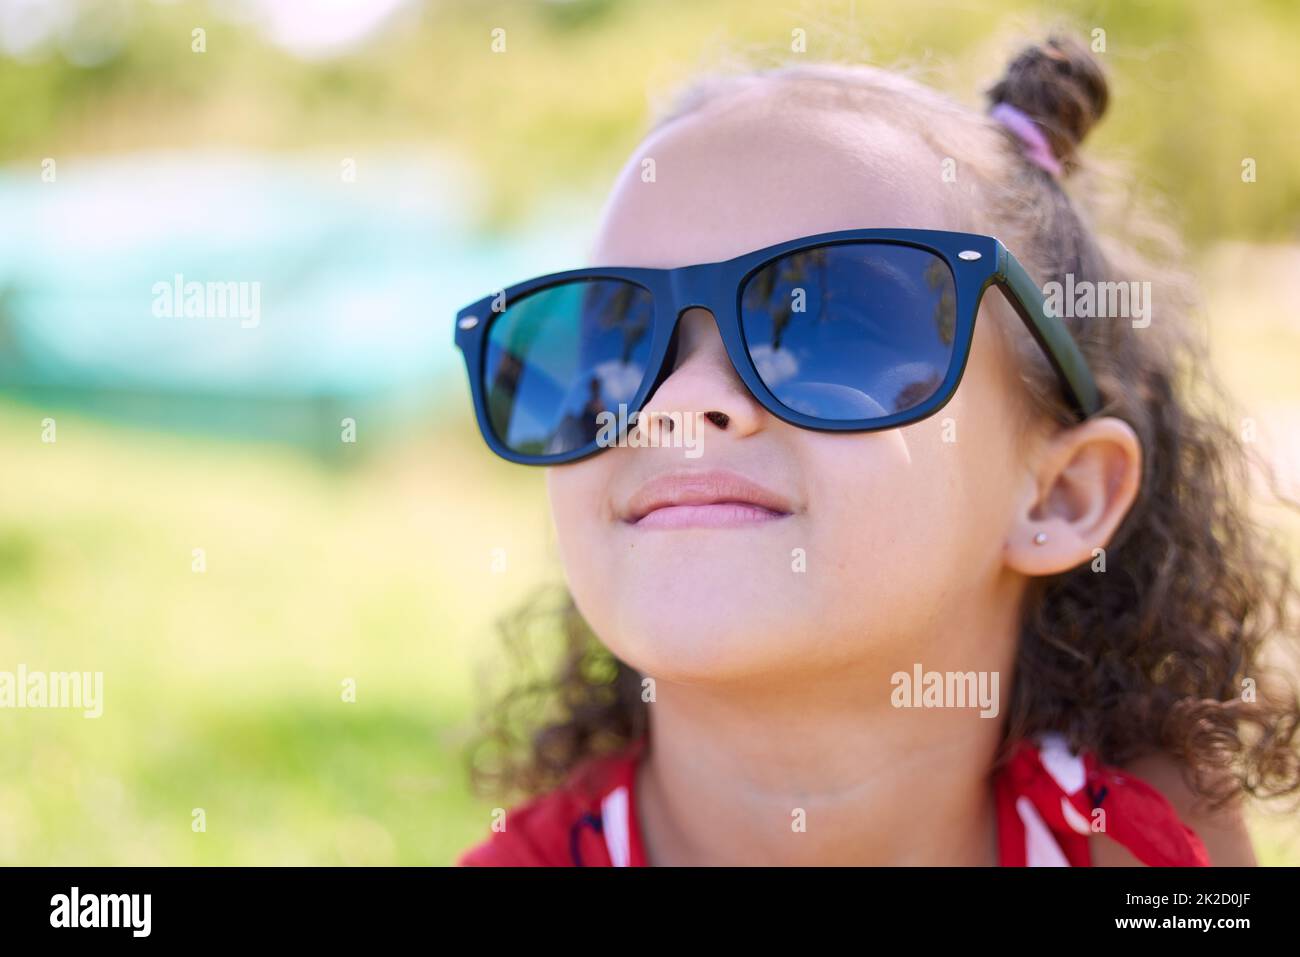 Everyone loves sunny days. Shot of an adorable little girl wearing sunglasses while at the park. Stock Photo